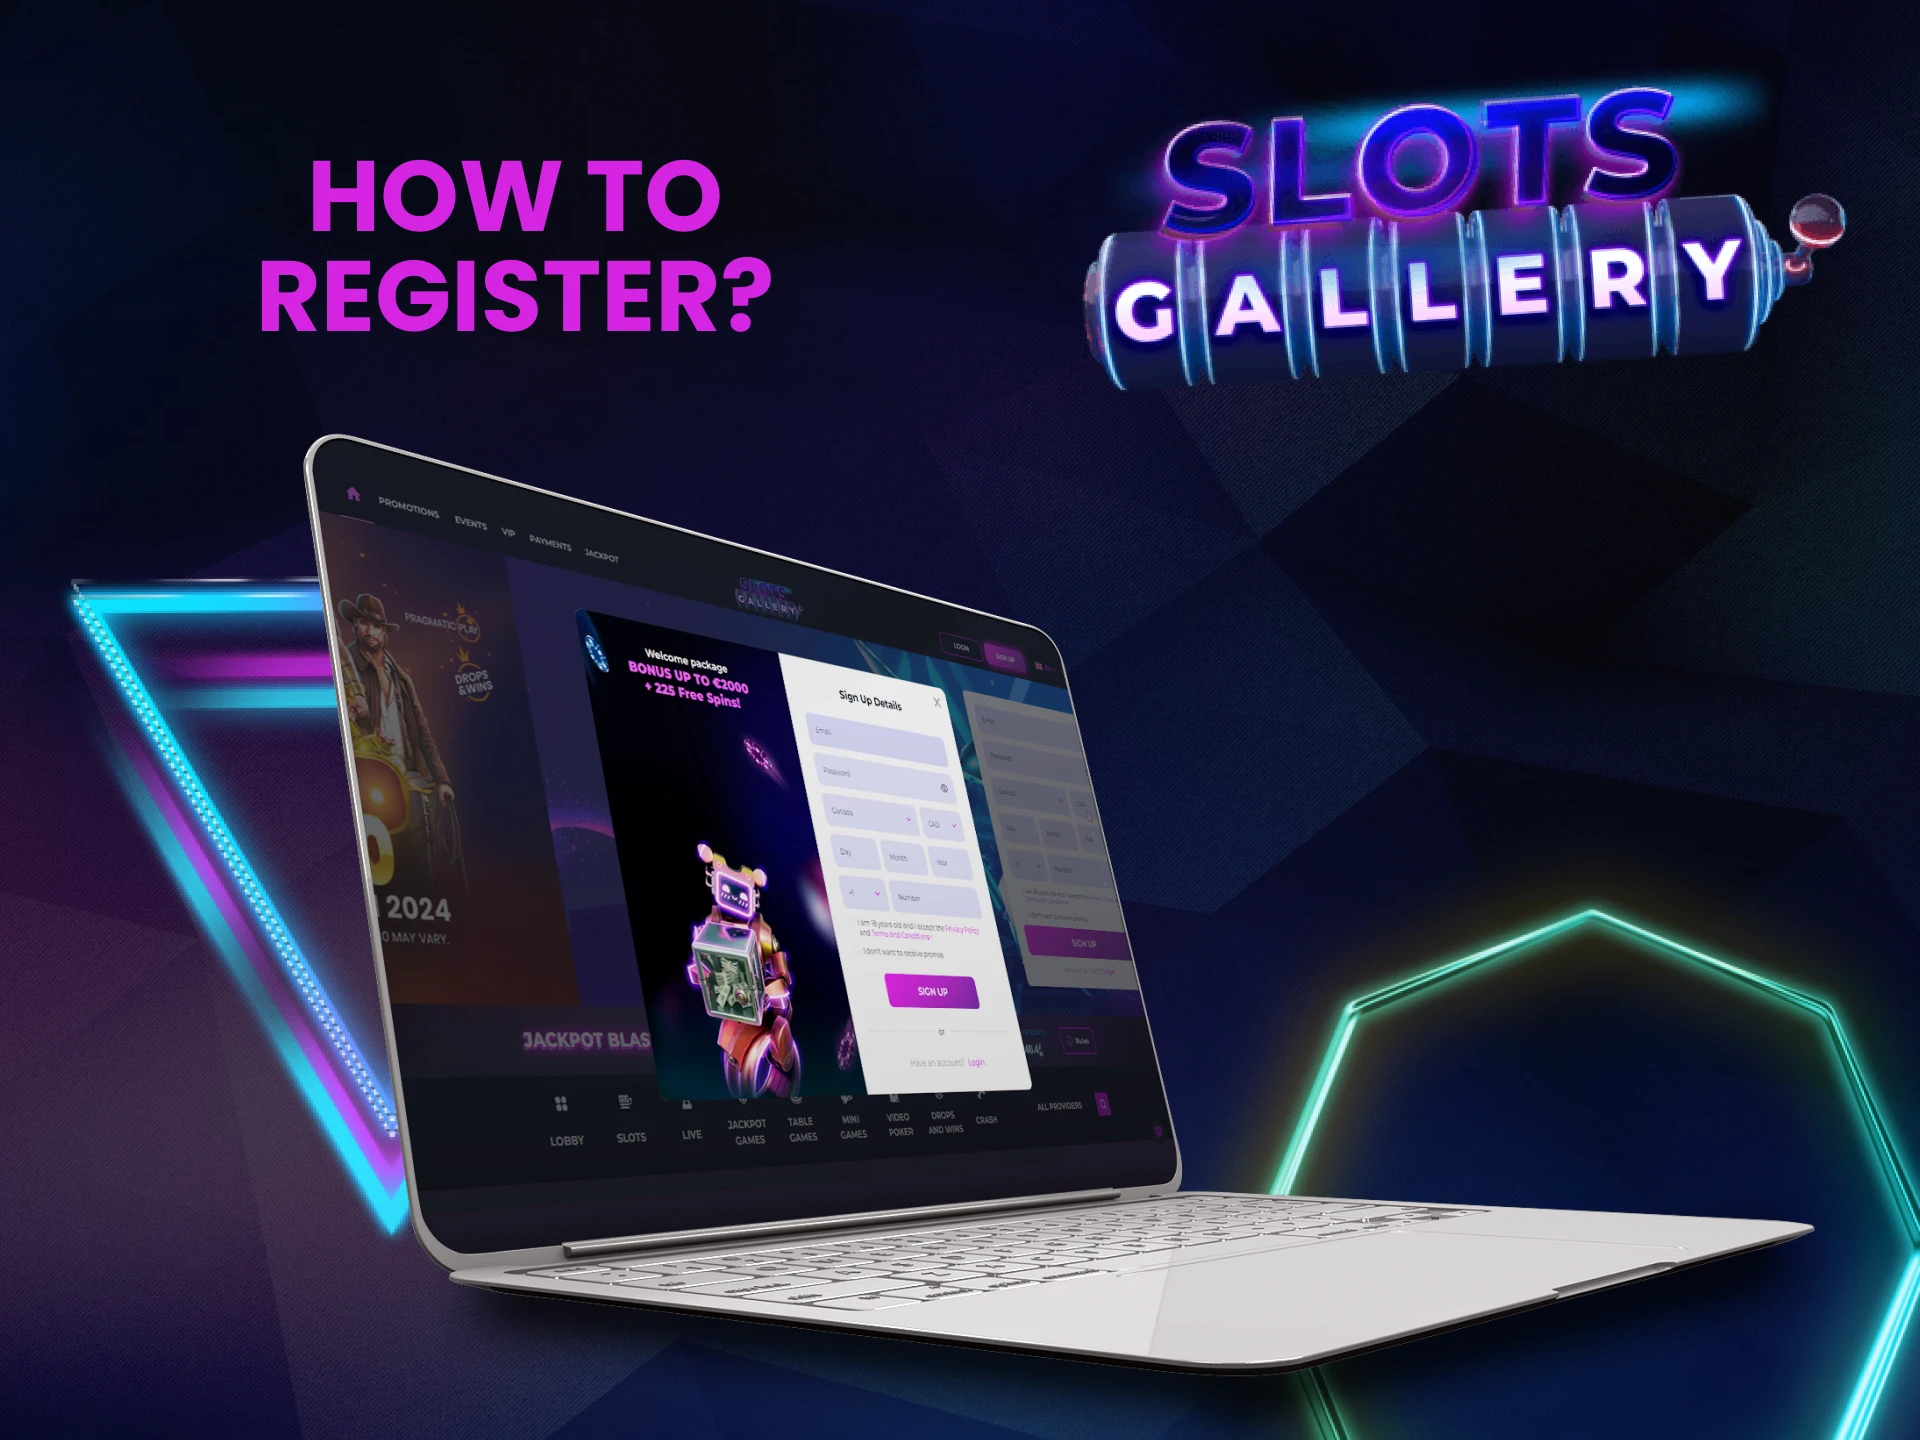 We will tell you how to create an account on Slots Gallery.